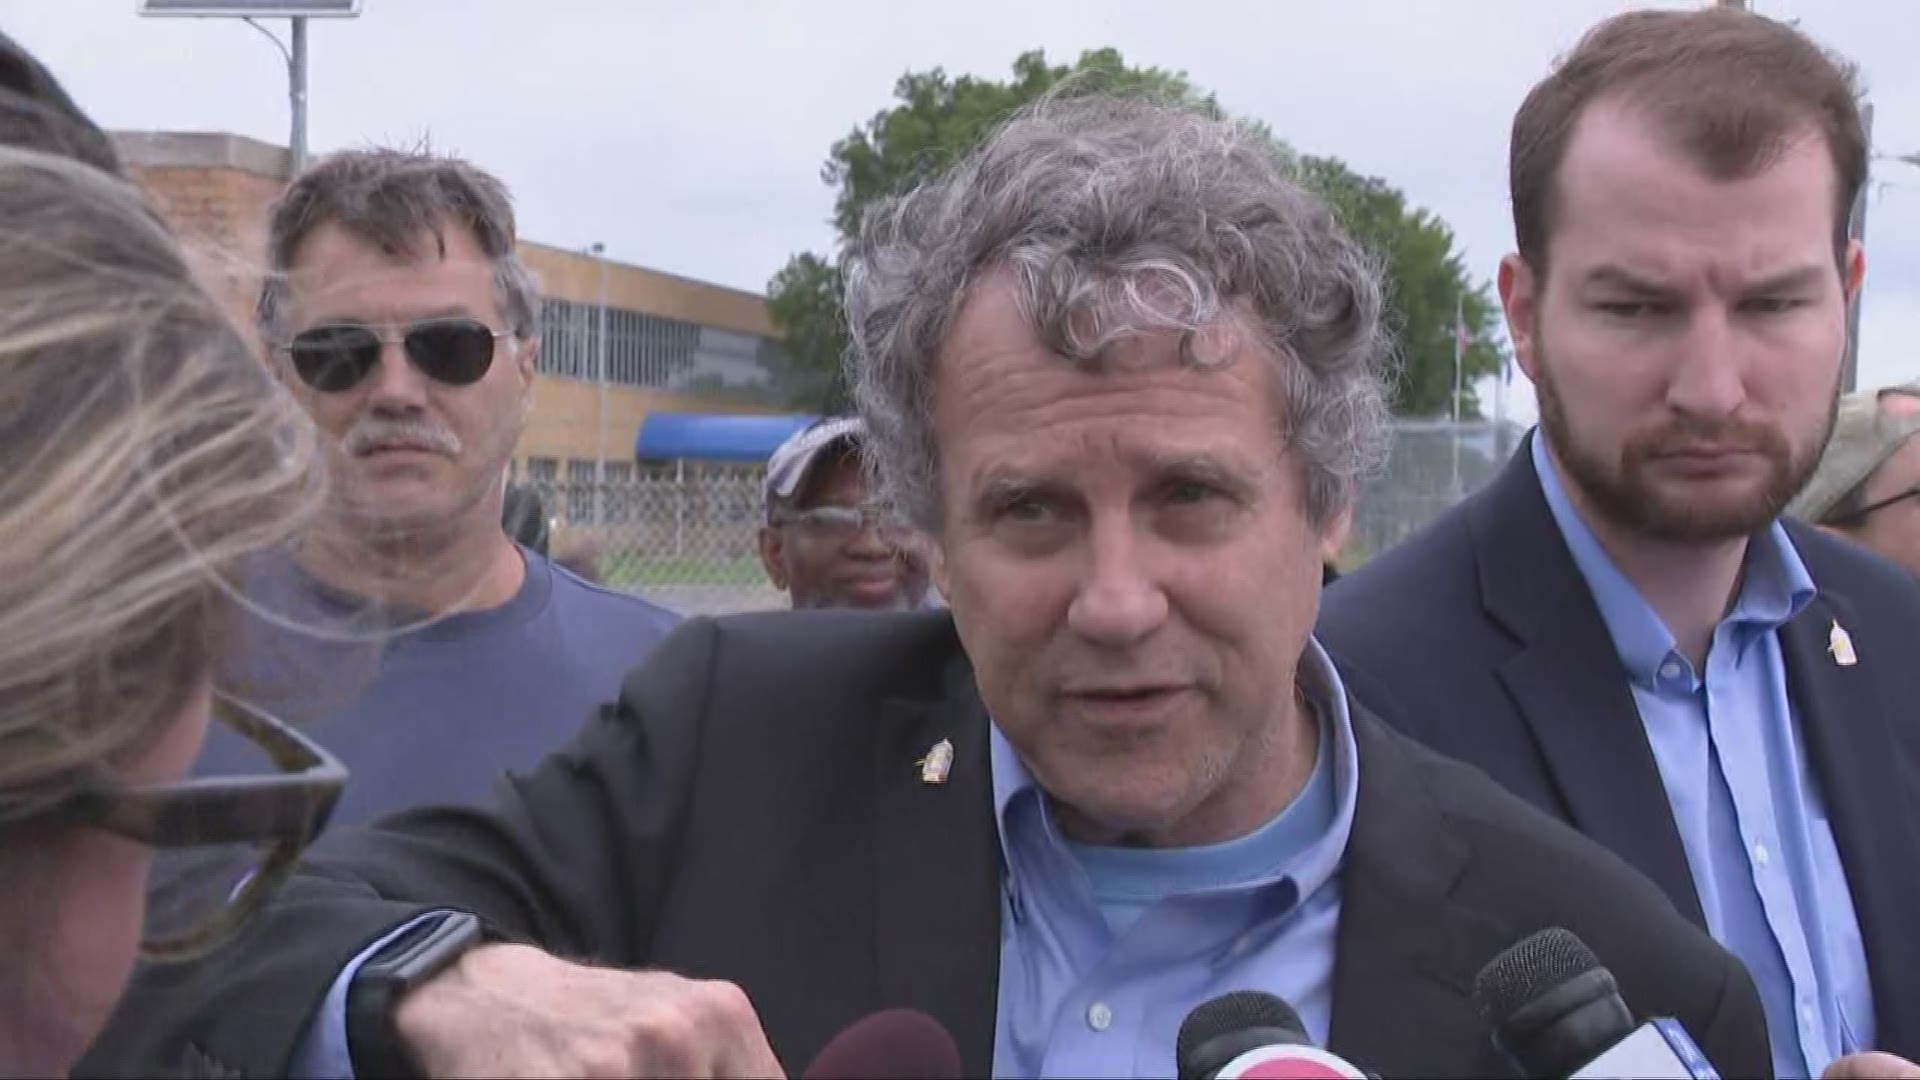 Striking auto workers continue to walk the picket line in Parma, Sherrod Brown visits site